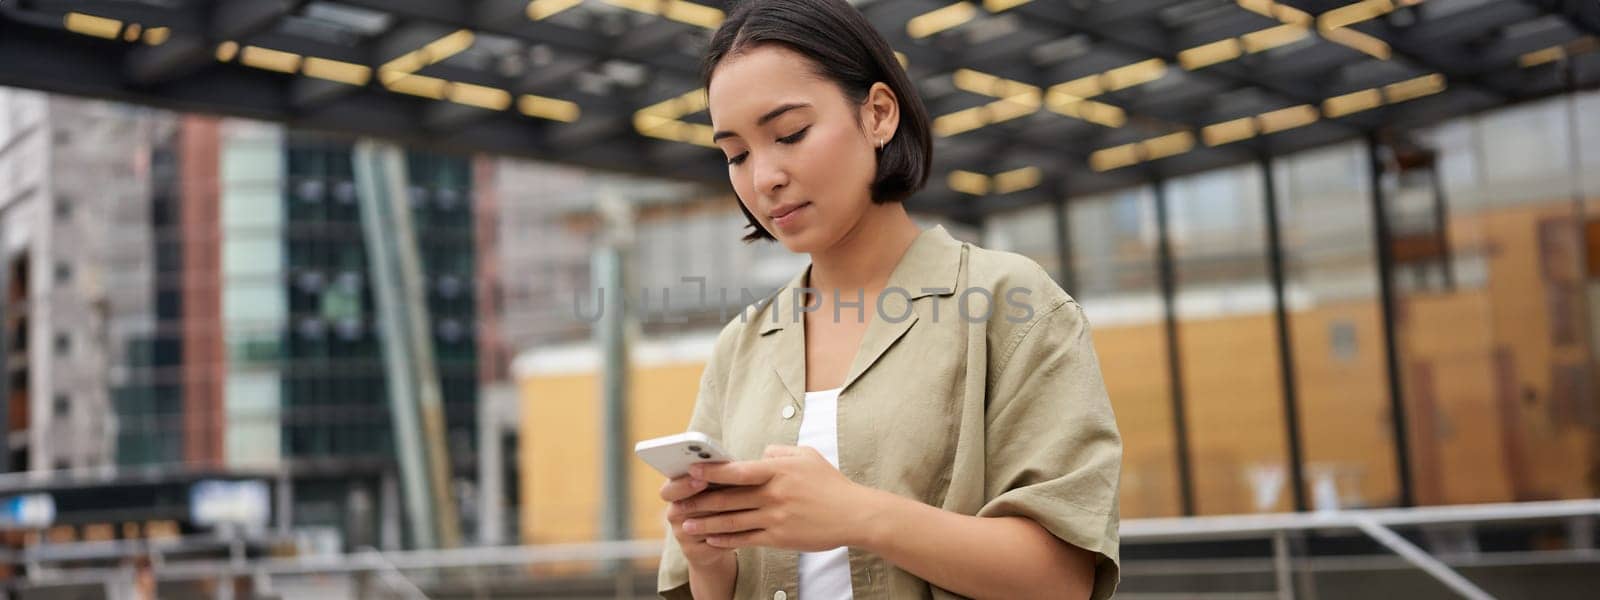 Technology people. Young smiling asian girl holding smartphone, using mobile app while standing on street, navigating around city.